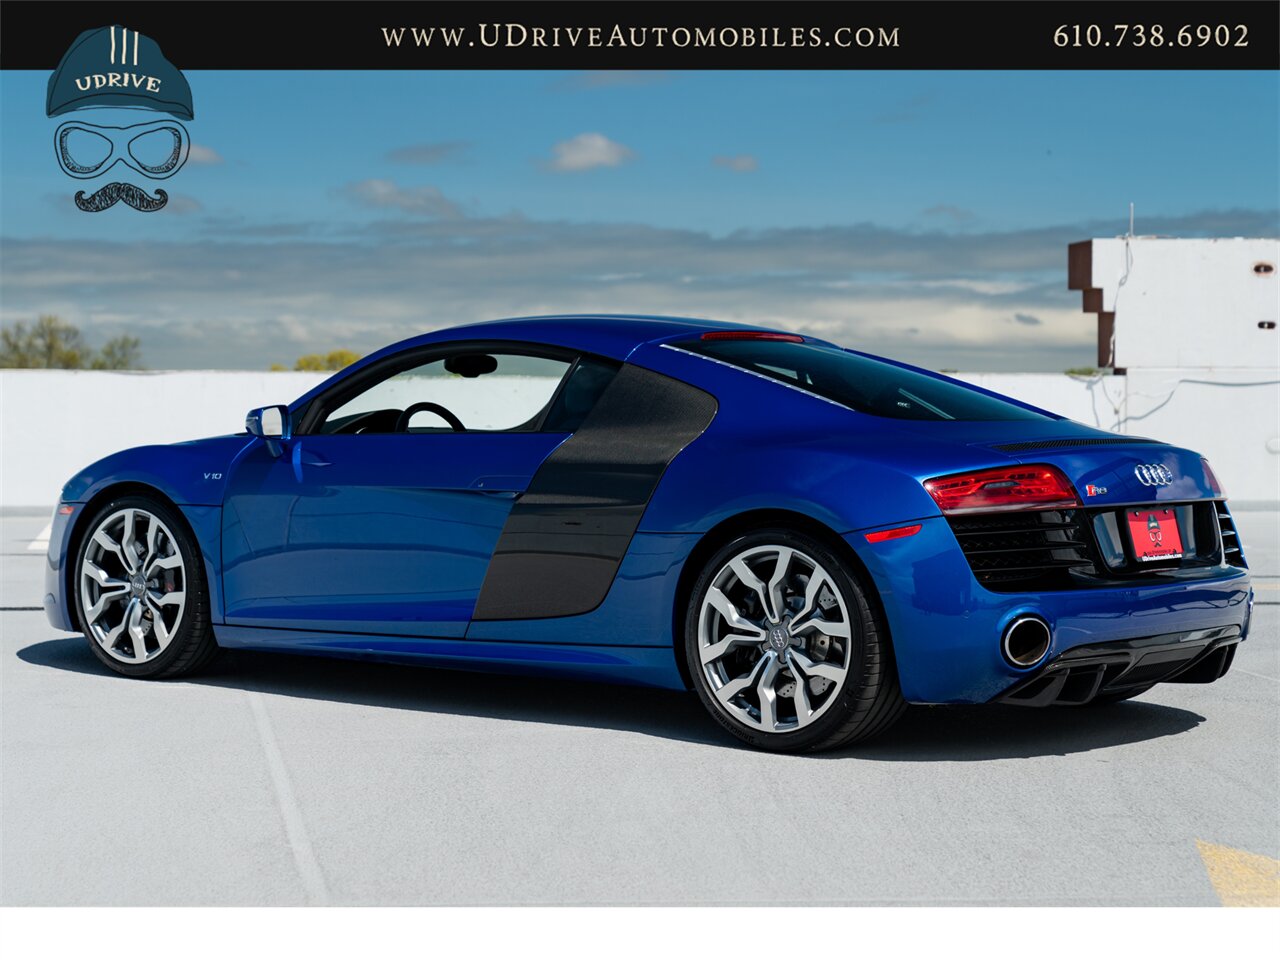 2015 Audi R8 5.2 V10 Quattro 6 Speed Manual 10k Miles  Diamond Stitched Leather 1 of 2 - Photo 23 - West Chester, PA 19382